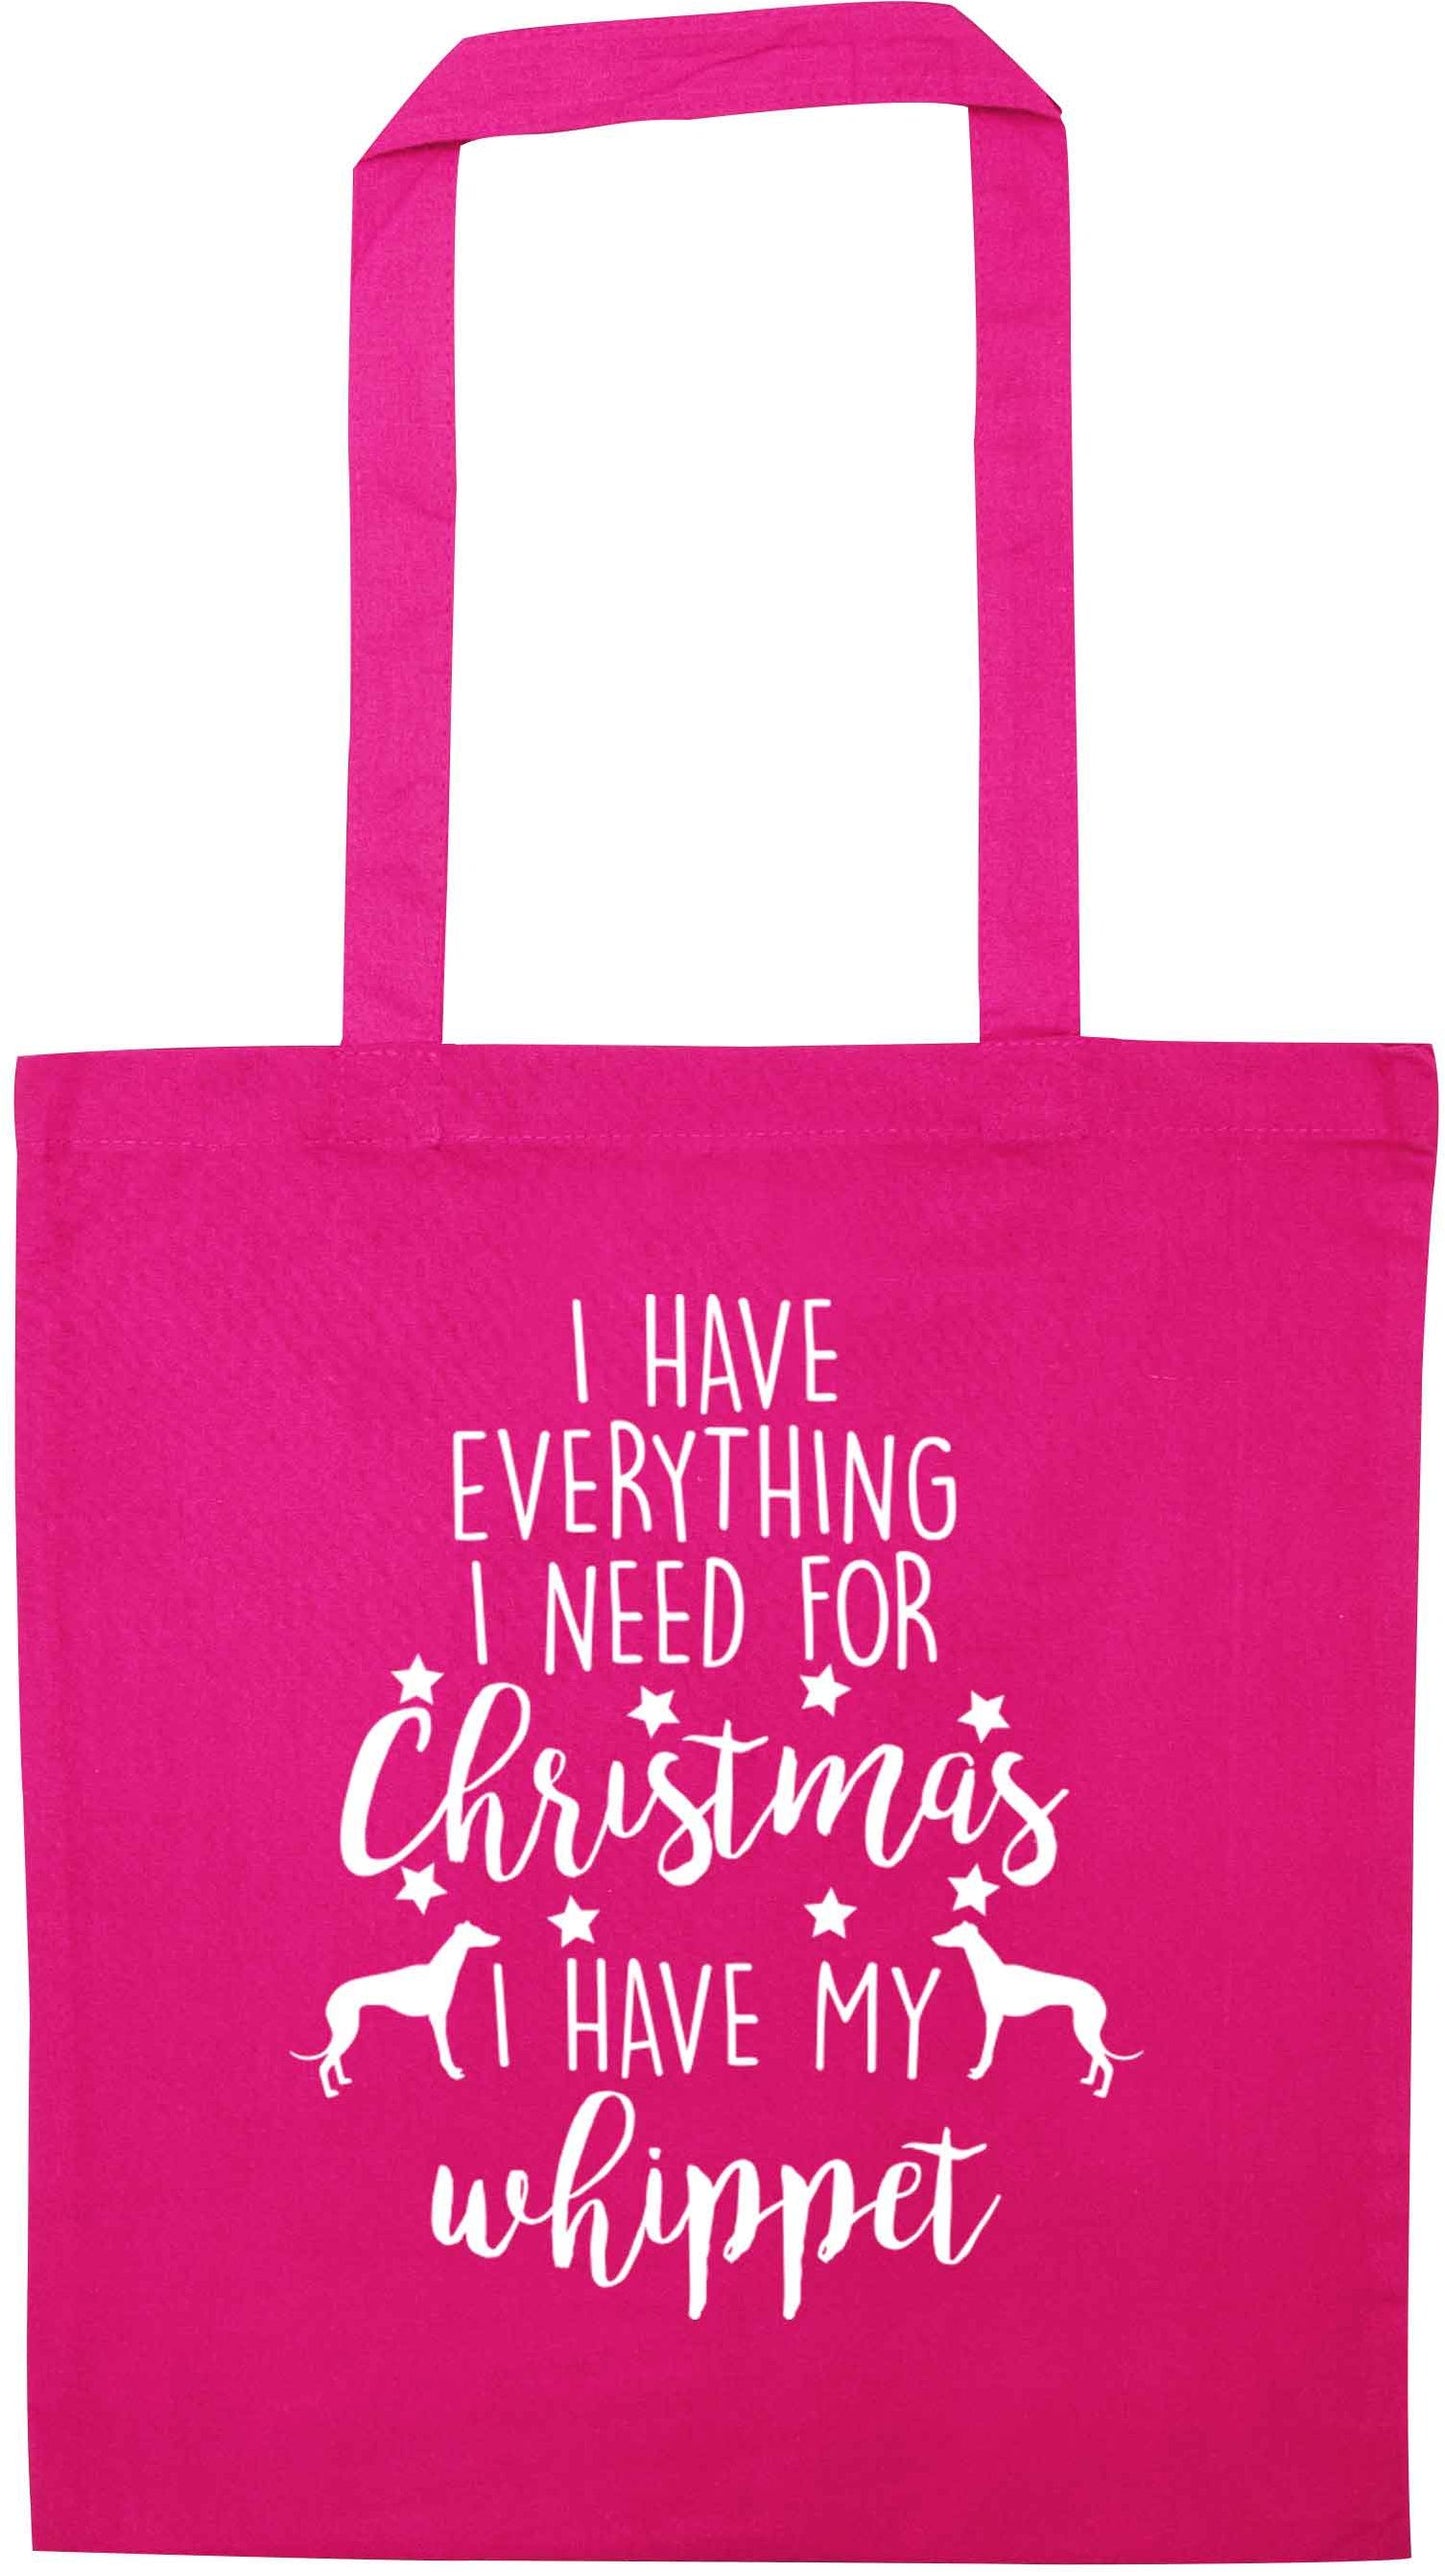 I have everything I need for Christmas I have my whippet pink tote bag